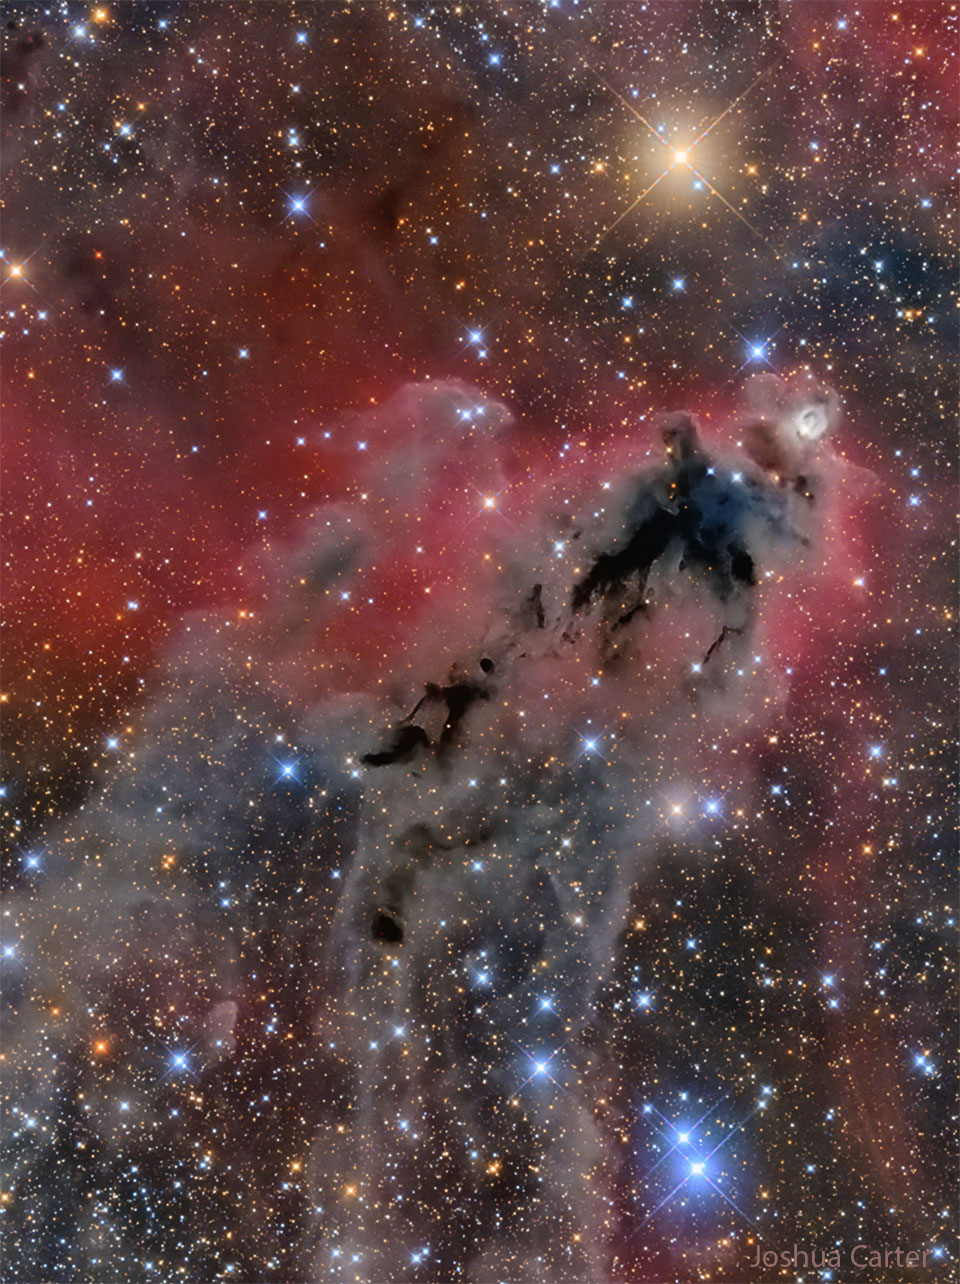 An image of a foreboding dark nebula before a red-glowing gas 
background and many bright and colorful stars.
Please see the explanation for more detailed information.